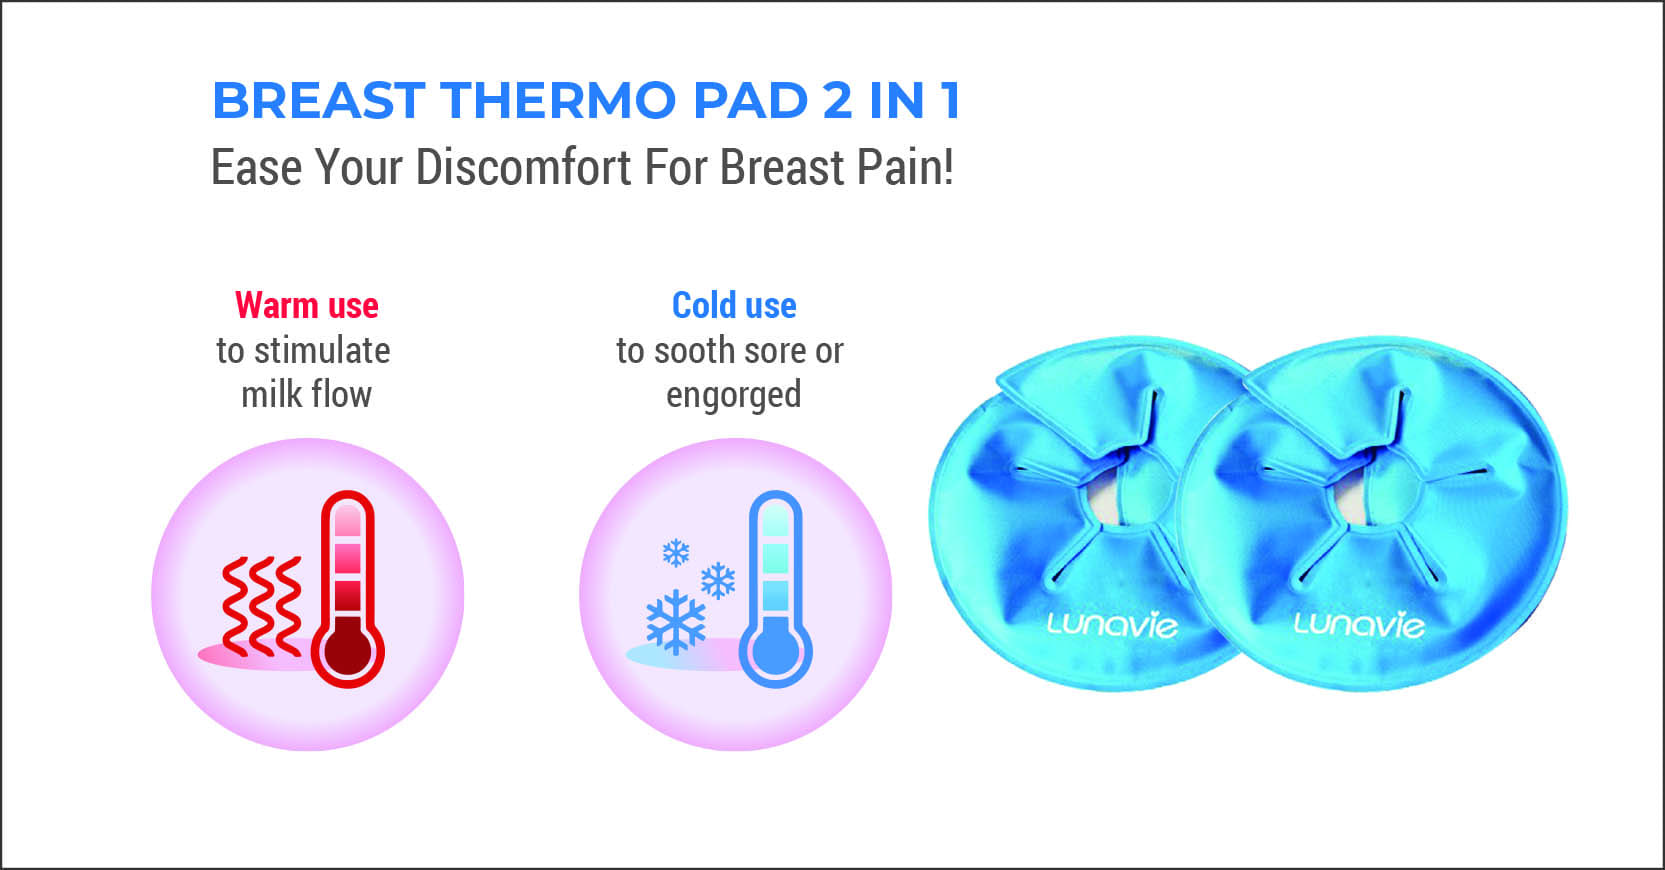 Breast Thermo Pad